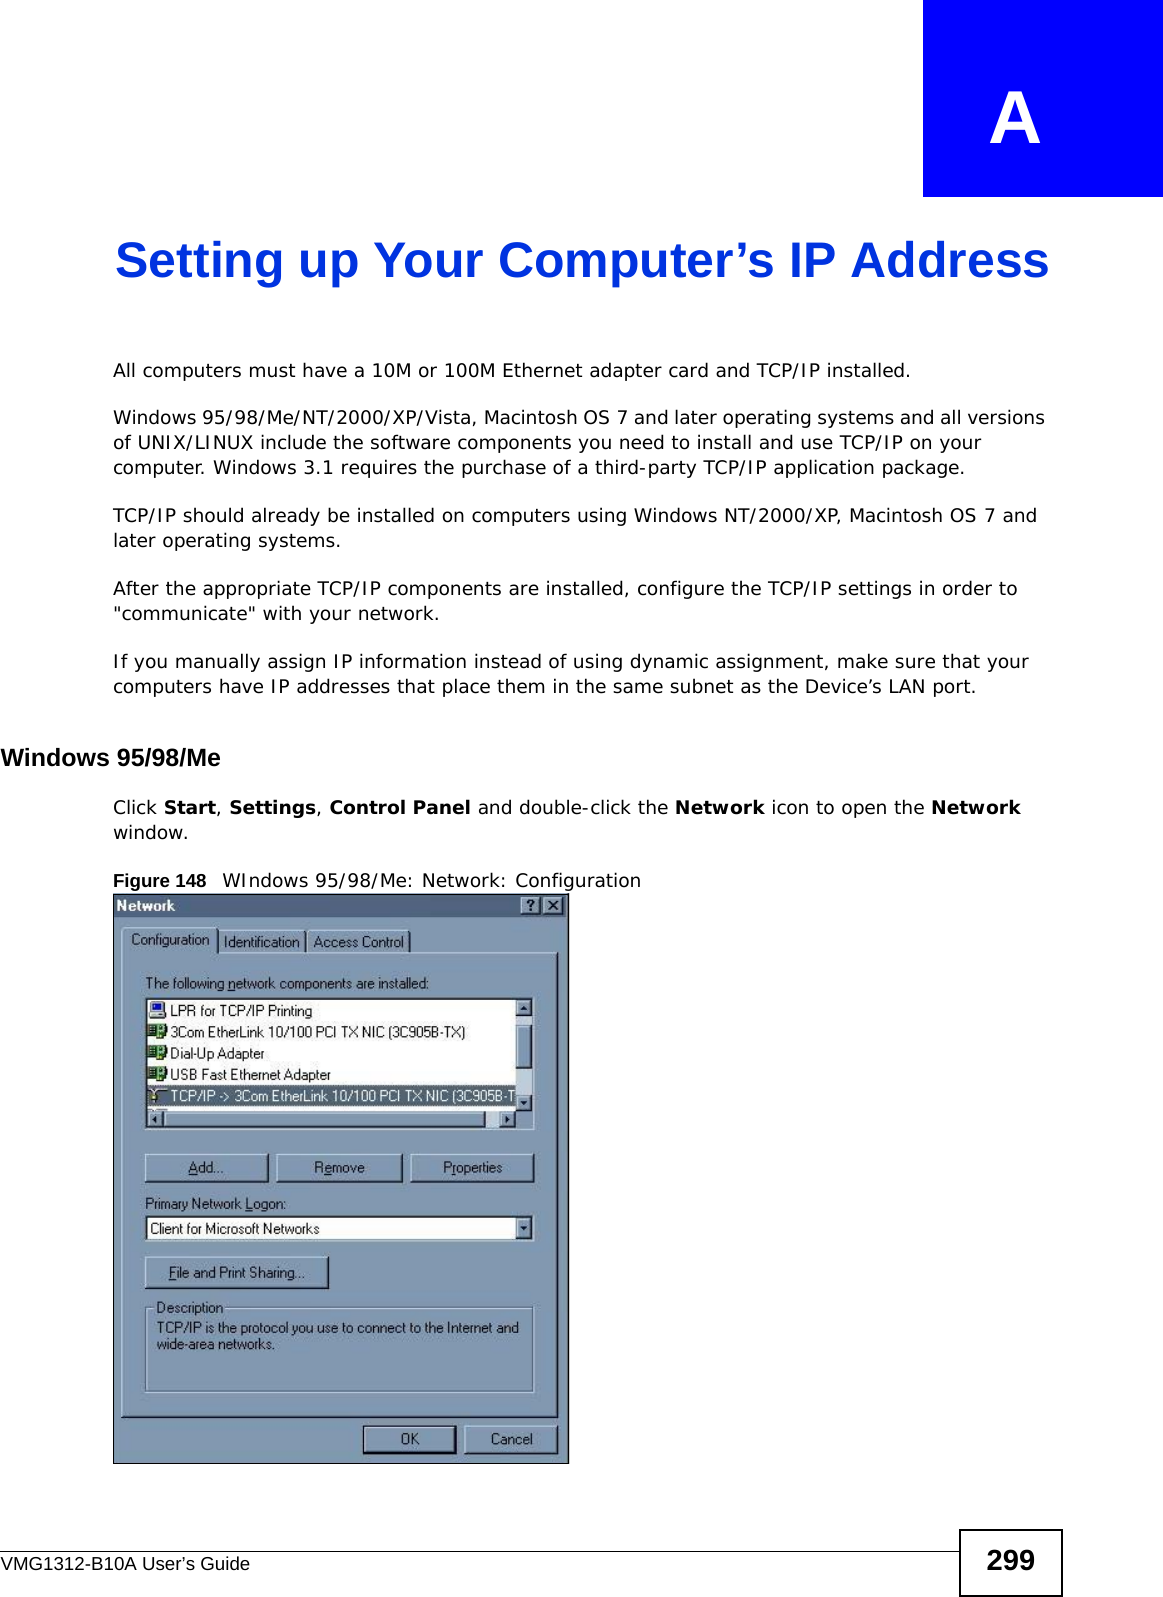 VMG1312-B10A User’s Guide 299APPENDIX   ASetting up Your Computer’s IP AddressAll computers must have a 10M or 100M Ethernet adapter card and TCP/IP installed. Windows 95/98/Me/NT/2000/XP/Vista, Macintosh OS 7 and later operating systems and all versions of UNIX/LINUX include the software components you need to install and use TCP/IP on your computer. Windows 3.1 requires the purchase of a third-party TCP/IP application package.TCP/IP should already be installed on computers using Windows NT/2000/XP, Macintosh OS 7 and later operating systems.After the appropriate TCP/IP components are installed, configure the TCP/IP settings in order to &quot;communicate&quot; with your network. If you manually assign IP information instead of using dynamic assignment, make sure that your computers have IP addresses that place them in the same subnet as the Device’s LAN port.Windows 95/98/MeClick Start, Settings, Control Panel and double-click the Network icon to open the Network window.Figure 148   WIndows 95/98/Me: Network: Configuration